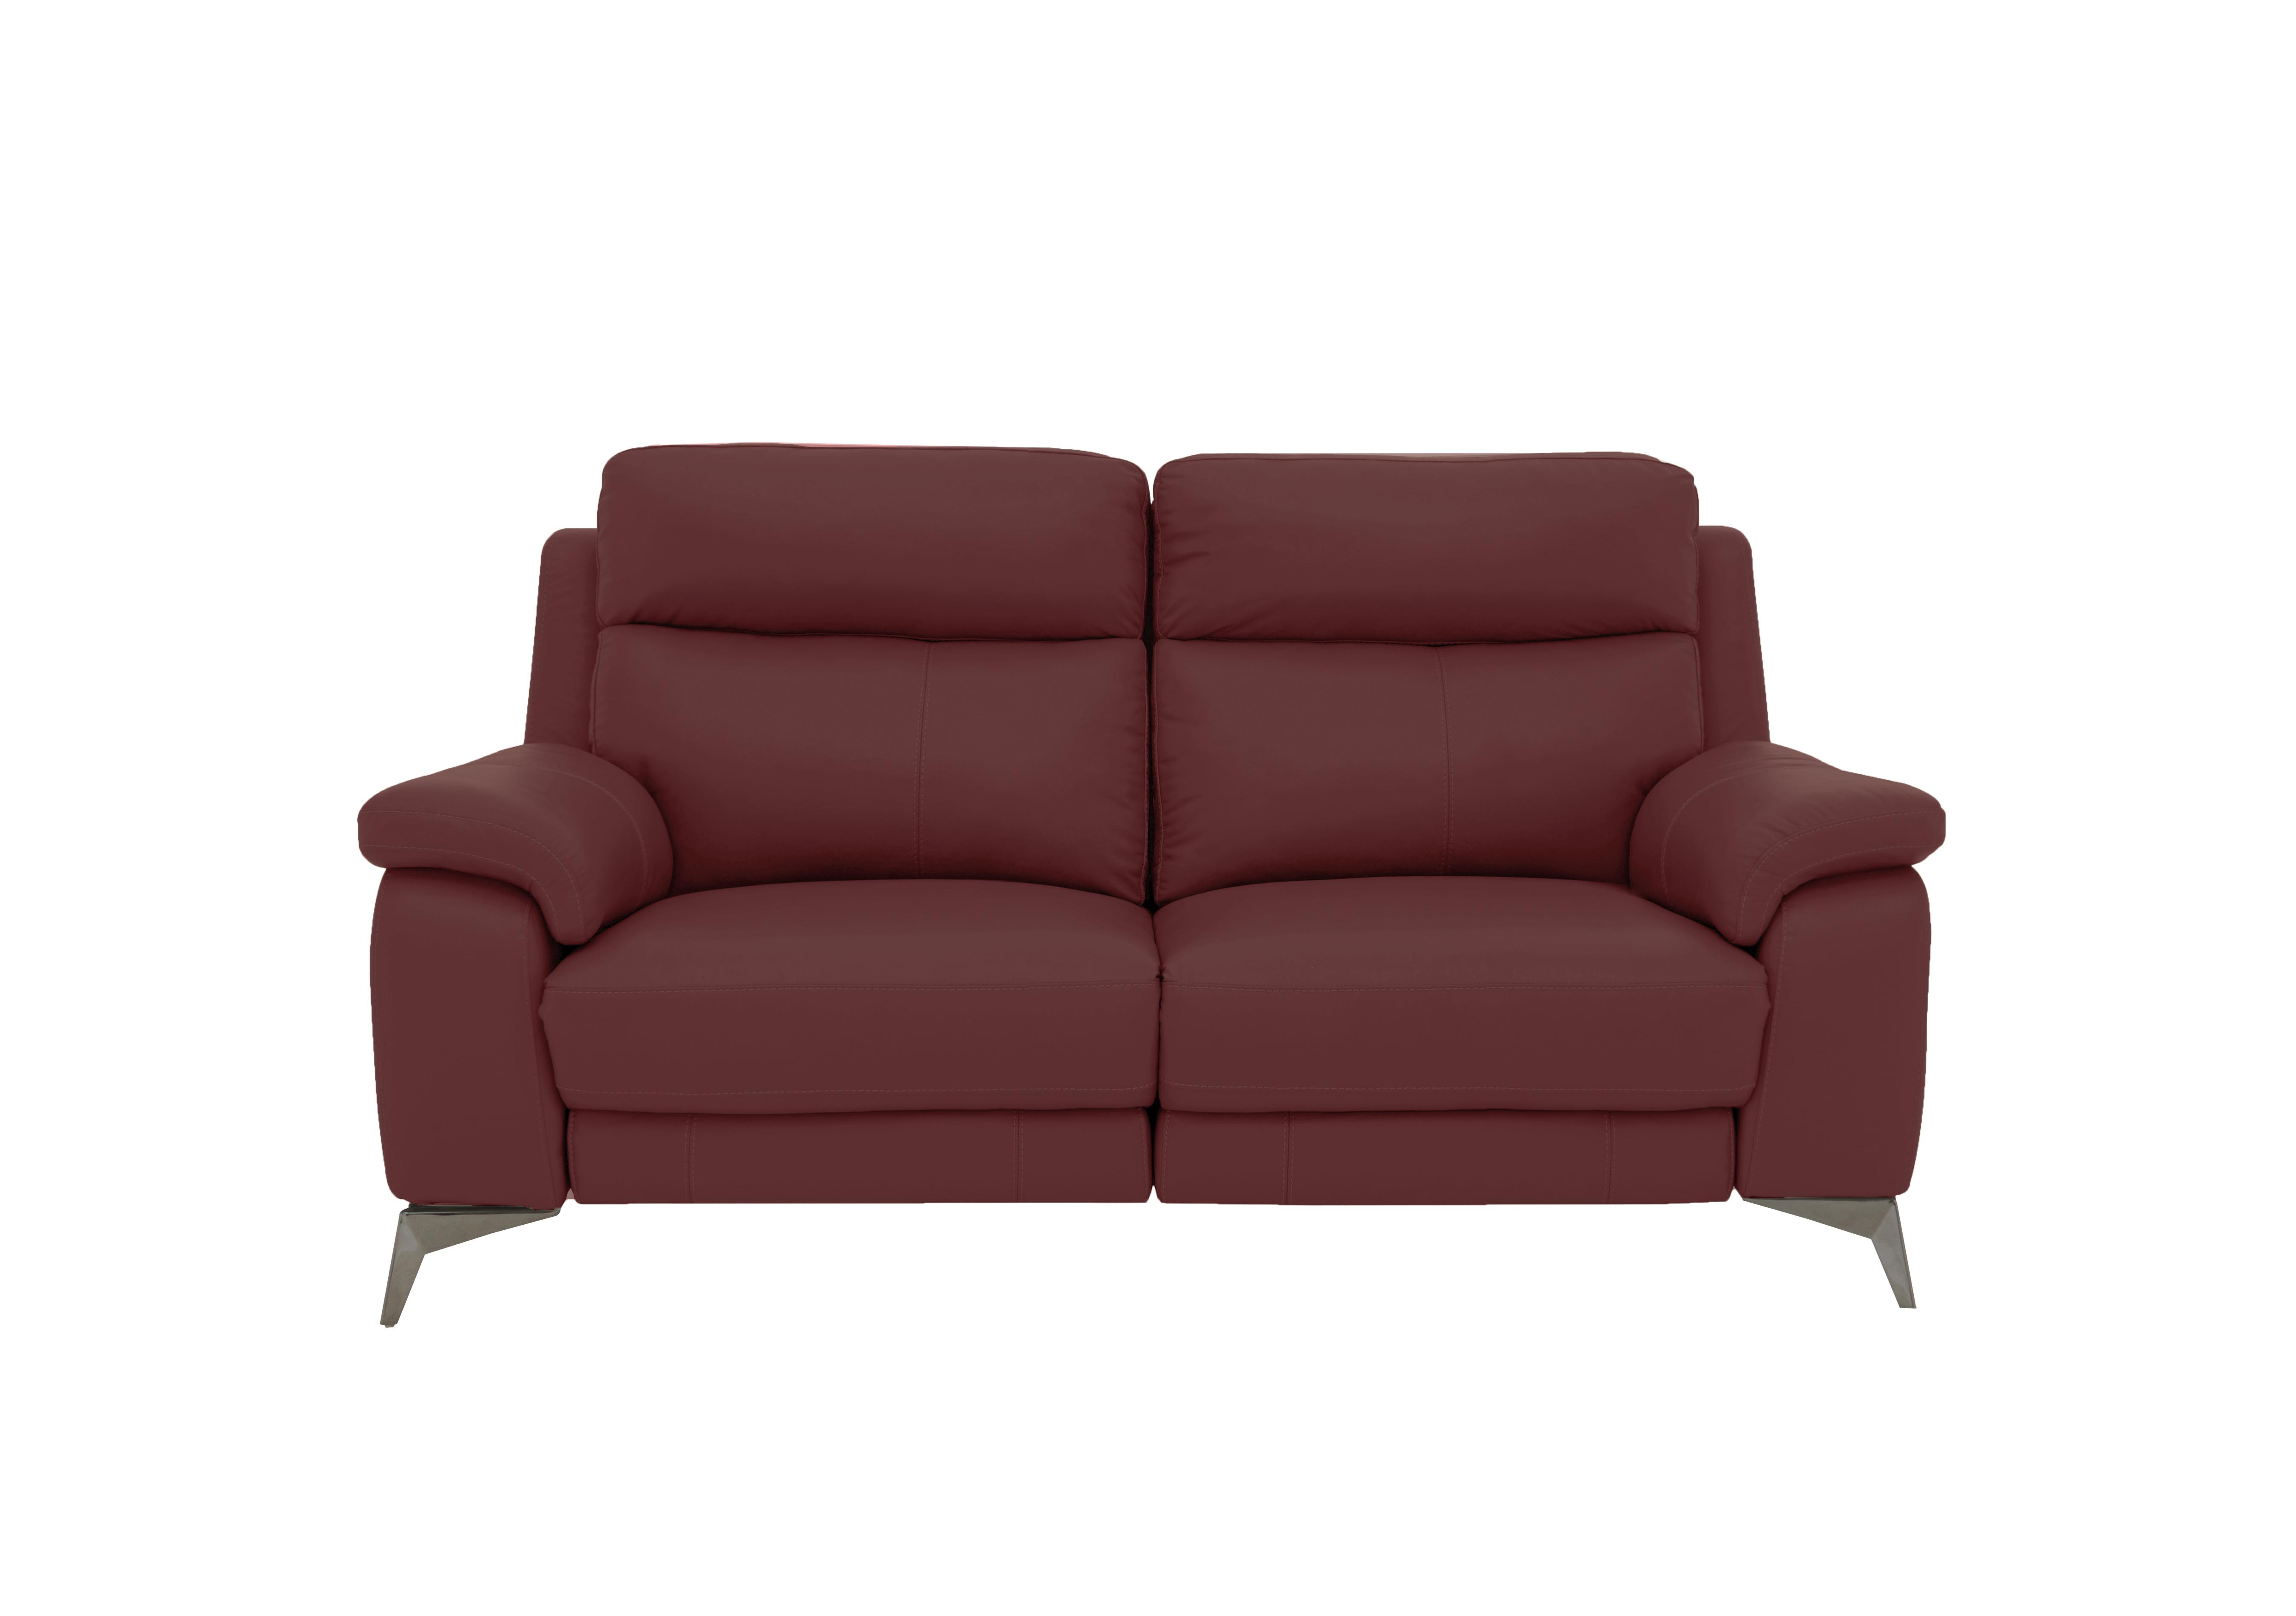 Missouri 2 Seater Leather Sofa in Bv-035c Deep Red on Furniture Village